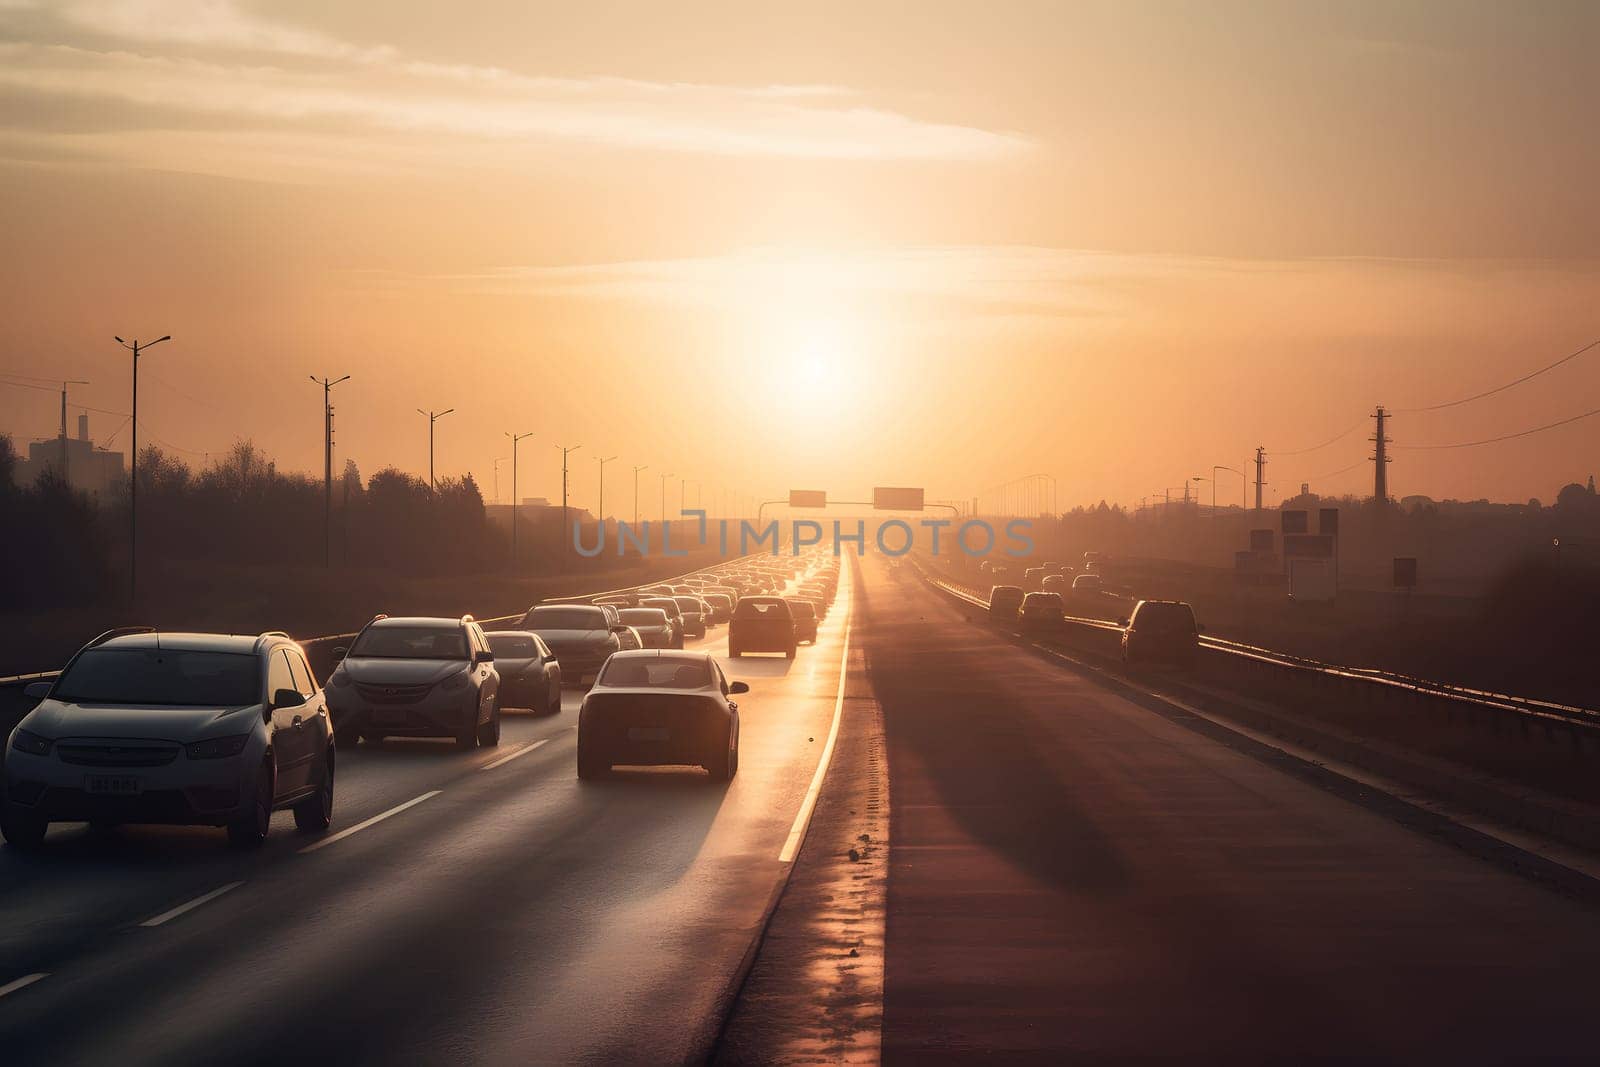 highway traffic in sunrise or sunset, neural network generated photorealistic image by z1b